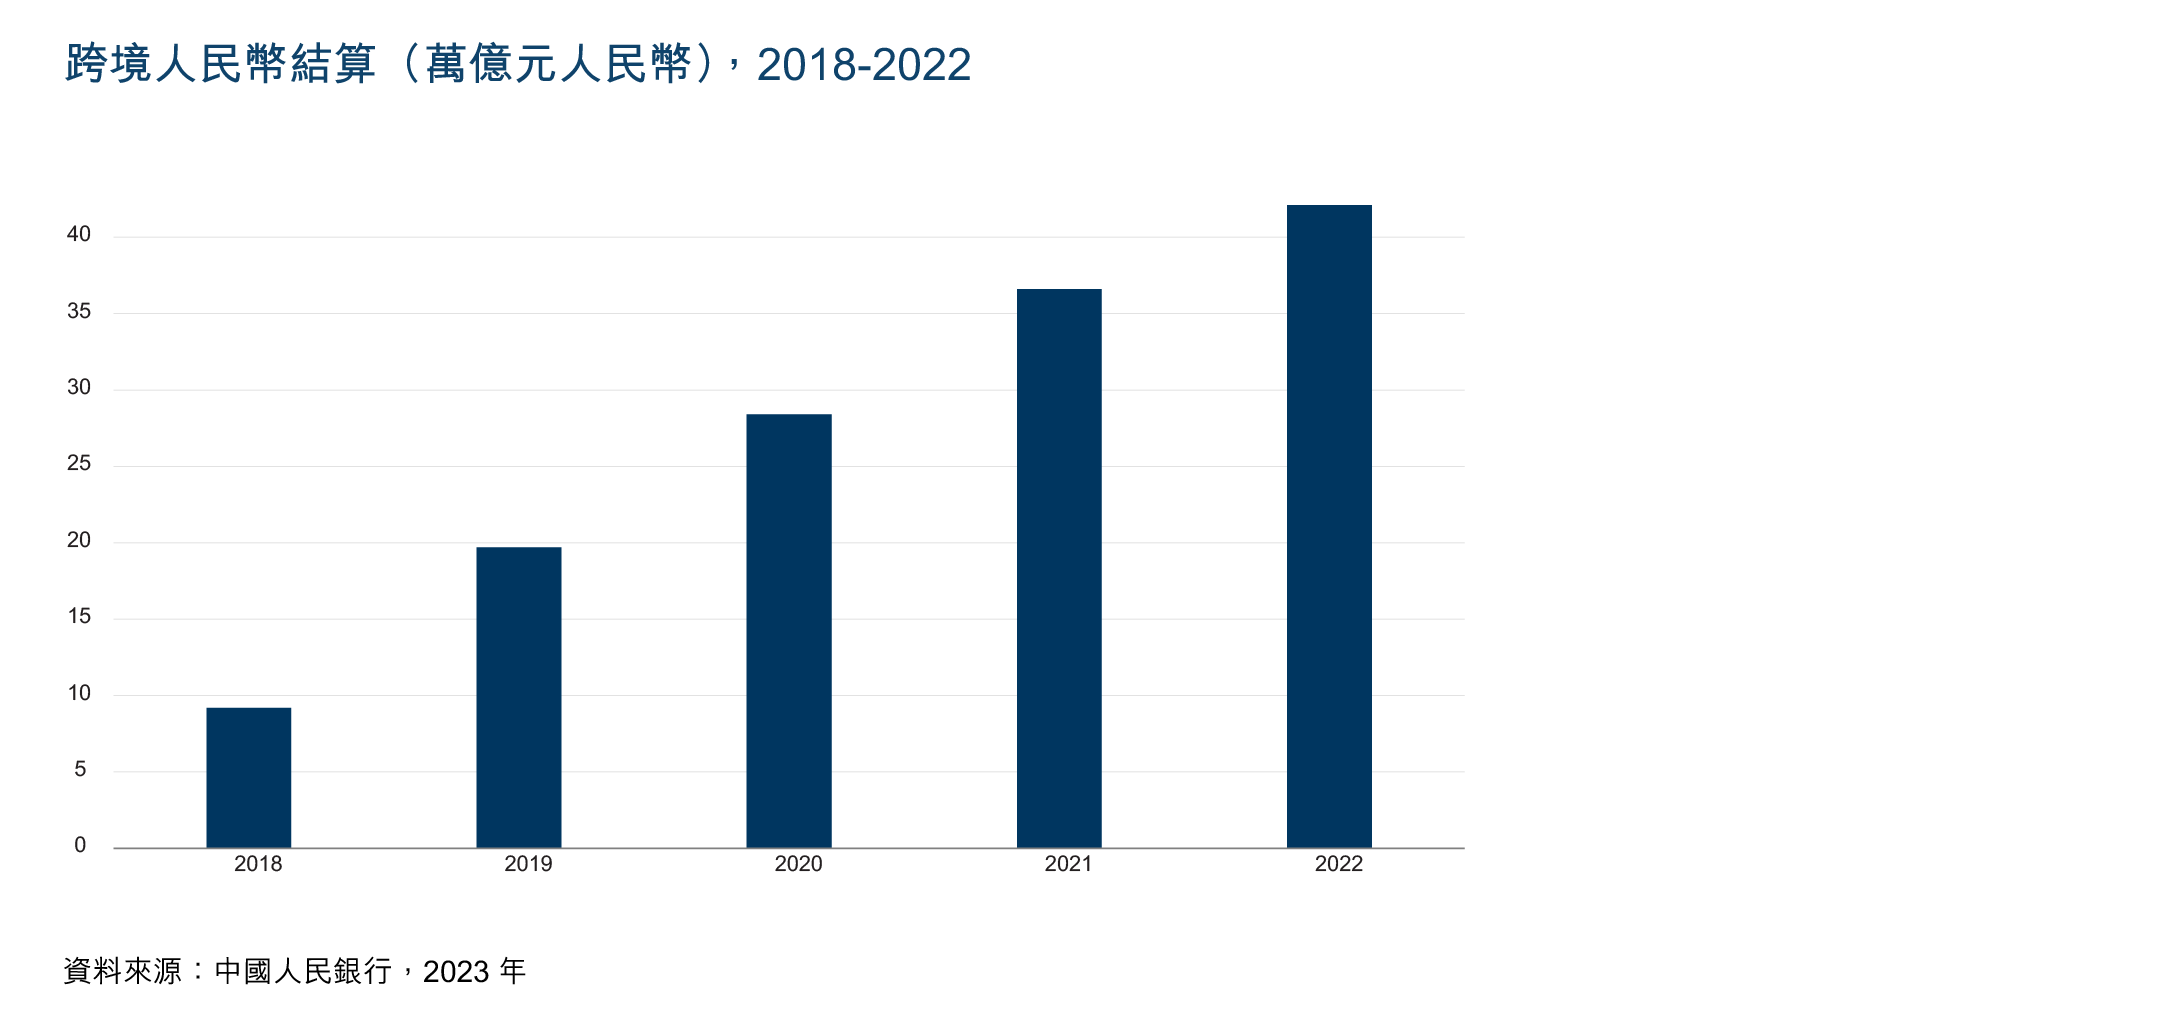 Chart showing total cross-border RMB settlements in RMB trillions from 2018 to 2022